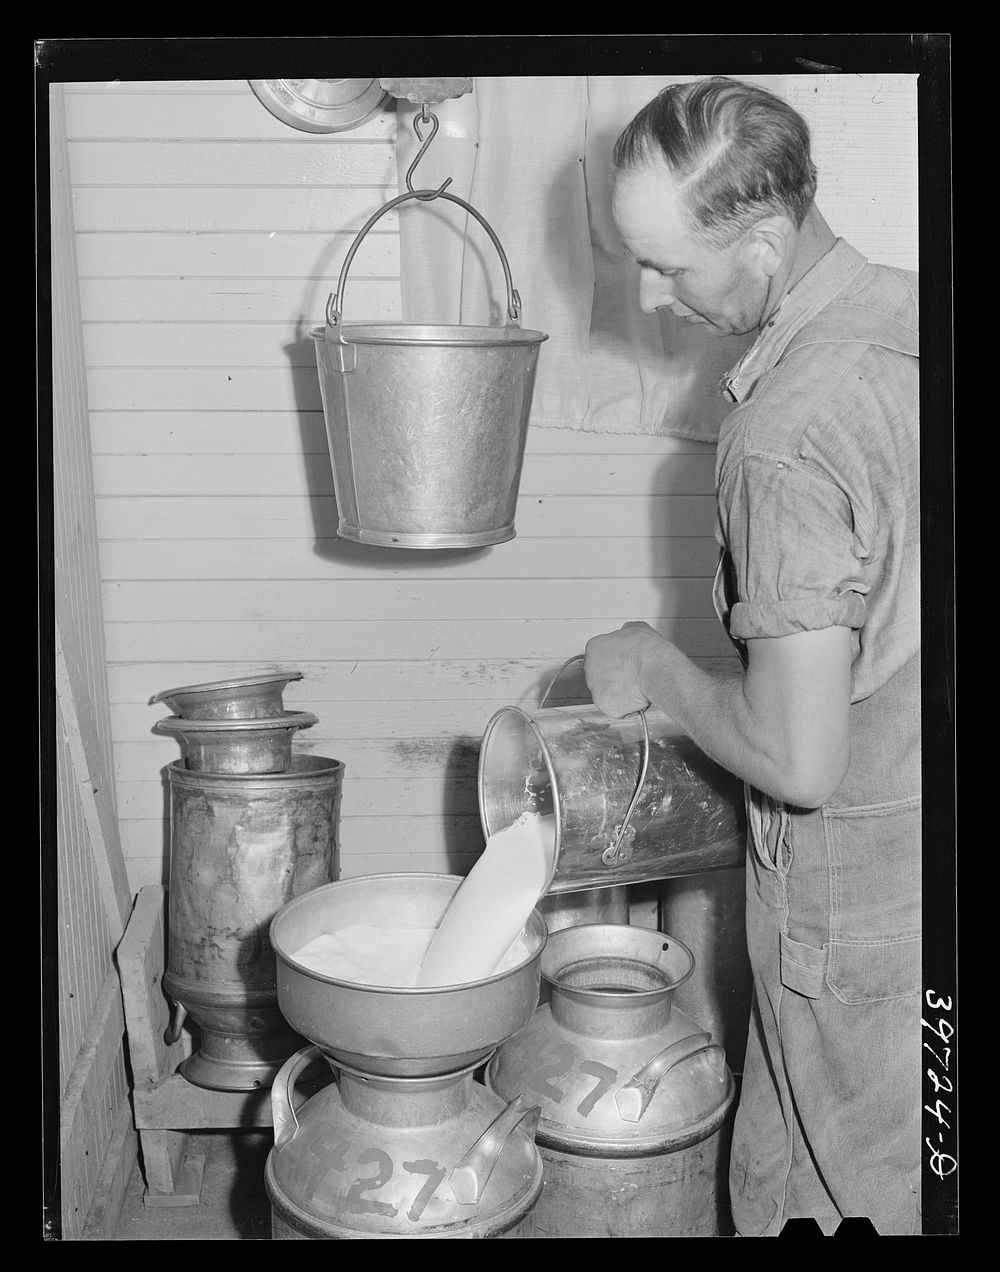 Pouring milk into cans. Farm of member of the Dairymen's Cooperative Creamery. Caldwell, Canyon County, Idaho by Russell Lee